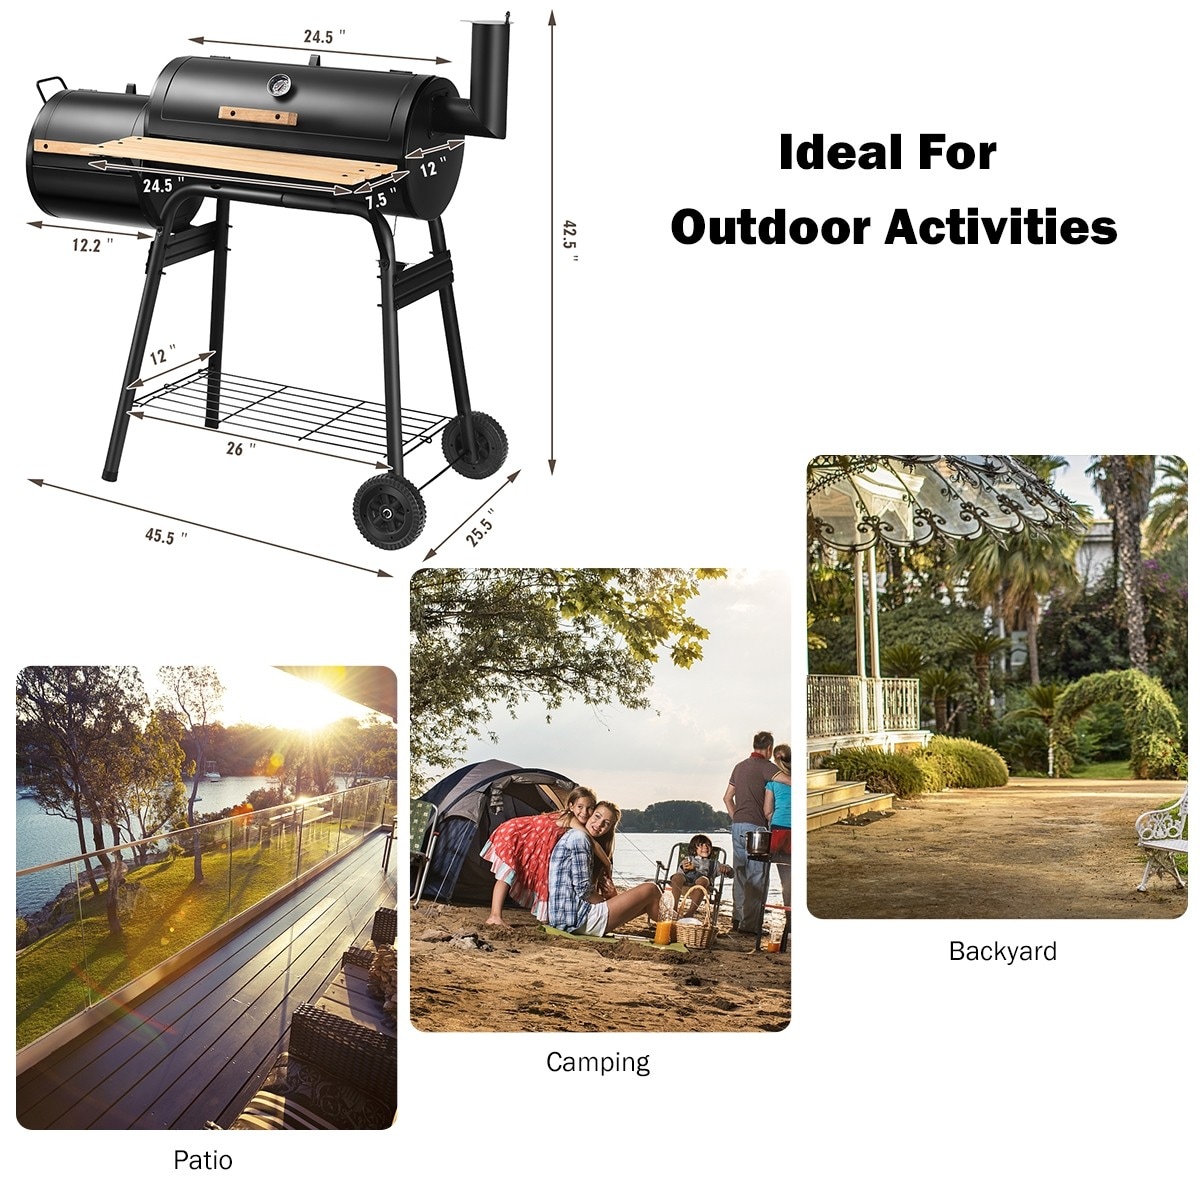 Grillz Charcoal BBQ Smoker Drill Outdoor Camping Patio Barbeque Steel Oven  - Fast Metal Roofs